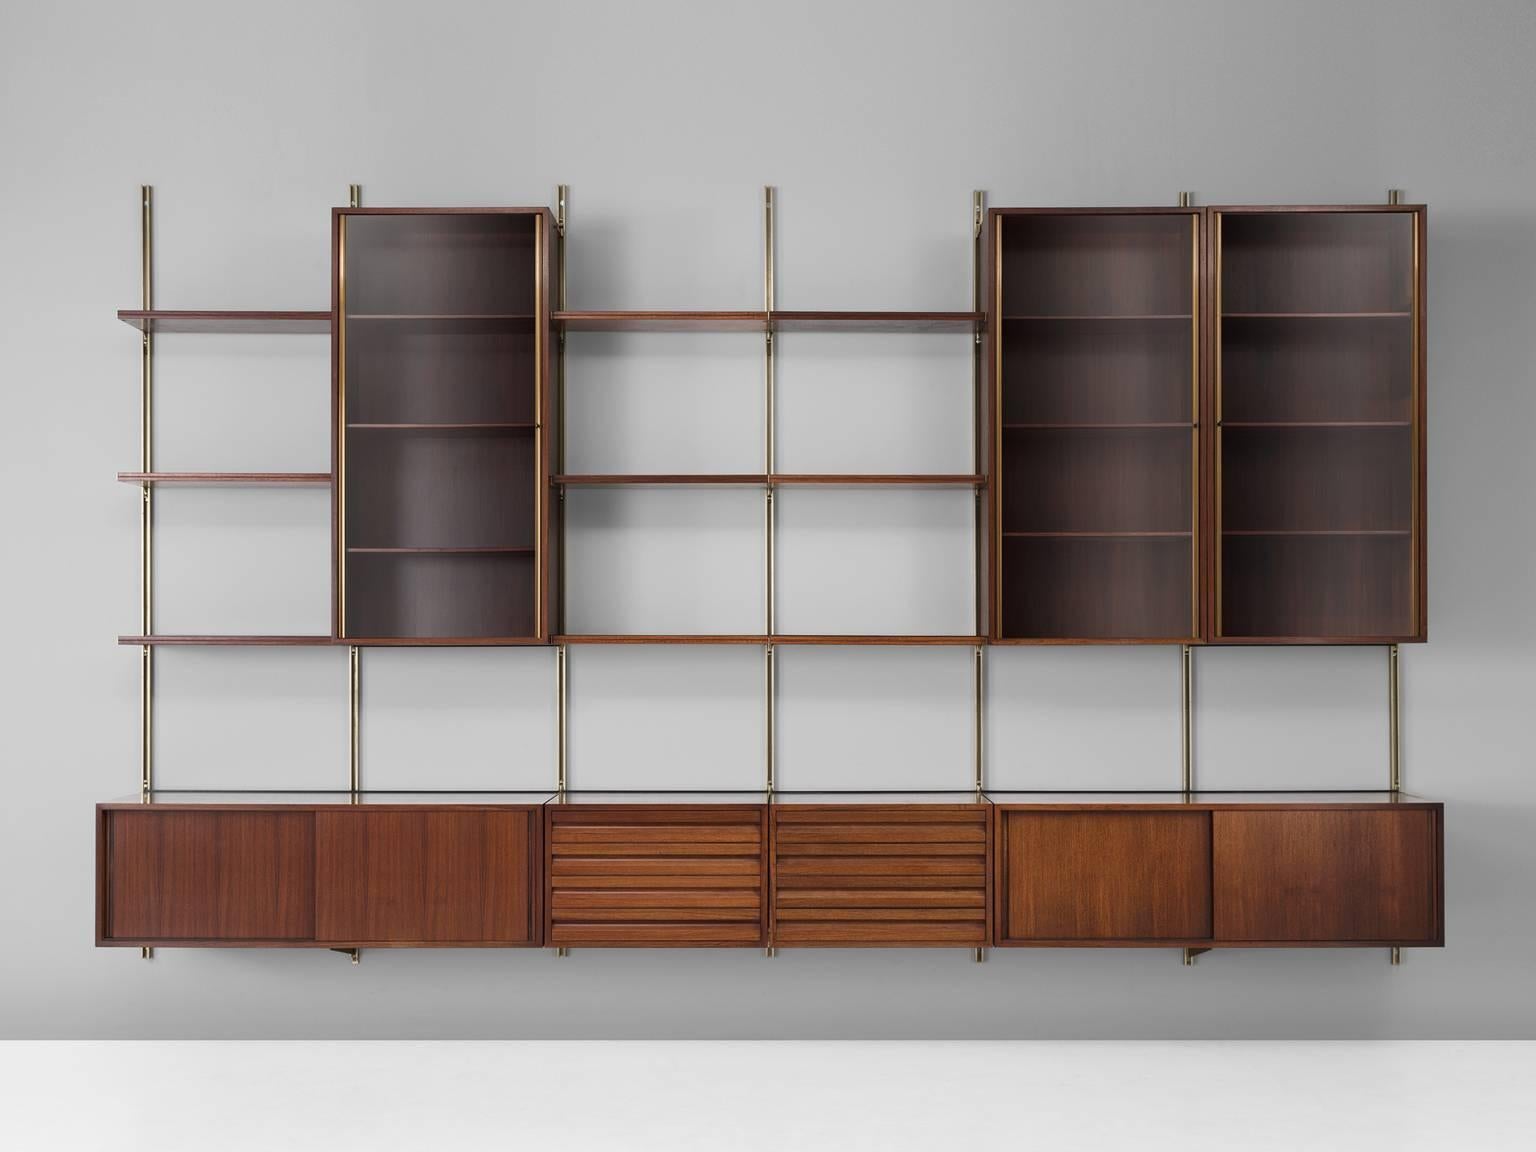 E22 wall-unit, in metal, brass, smoked glass and rosewood, by Osvaldo Borsani for Tecno, Italy, 1957.

This system of shelves was developed by the combination of the earlier L60 bookcase and the A57 wardrobe. According to Osvaldo Borsani the home